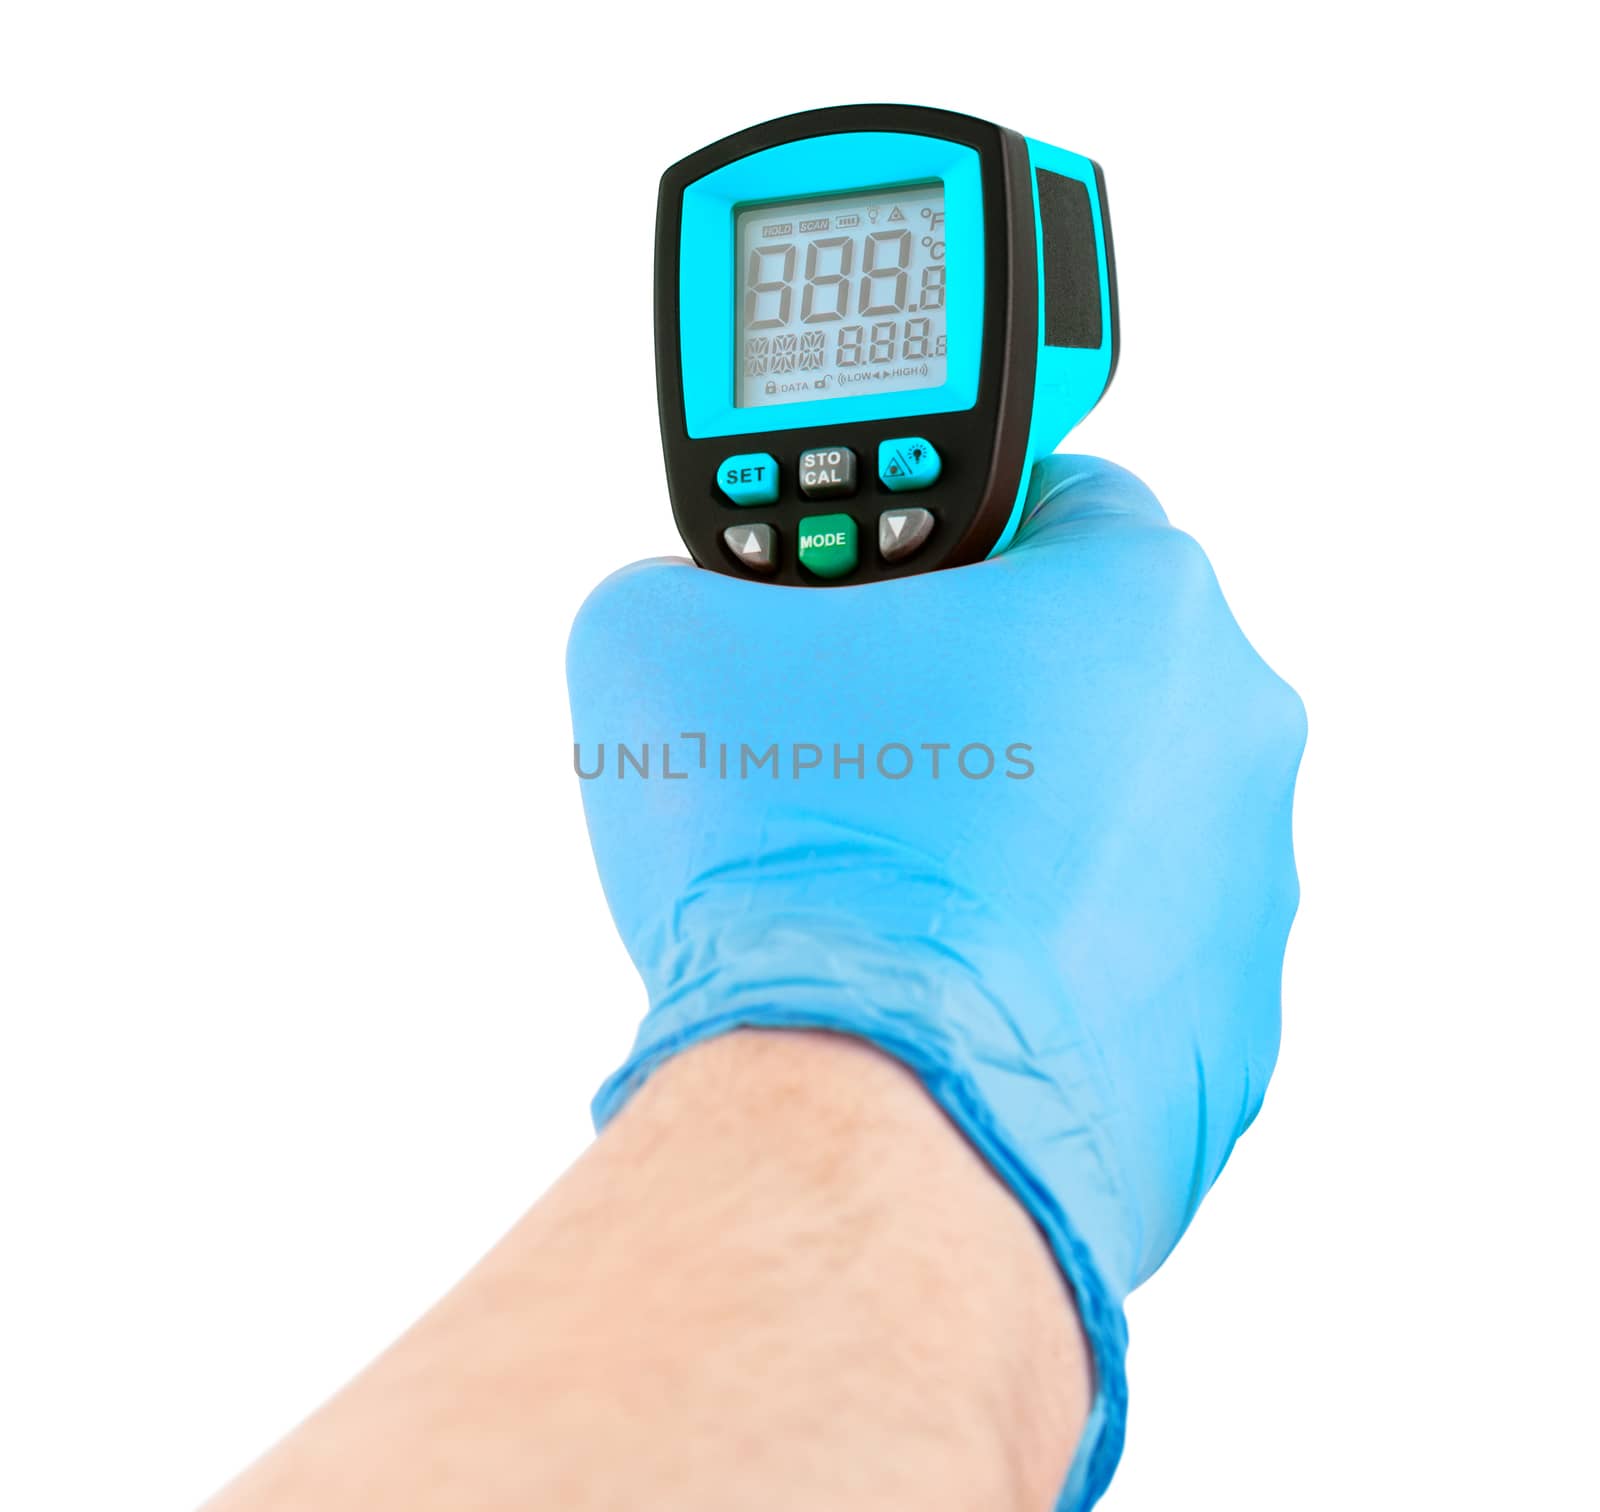 hand in blue medical latex glove aiming with infrared contactless thermometer isolated on white background, mockup display state with all symbols on.